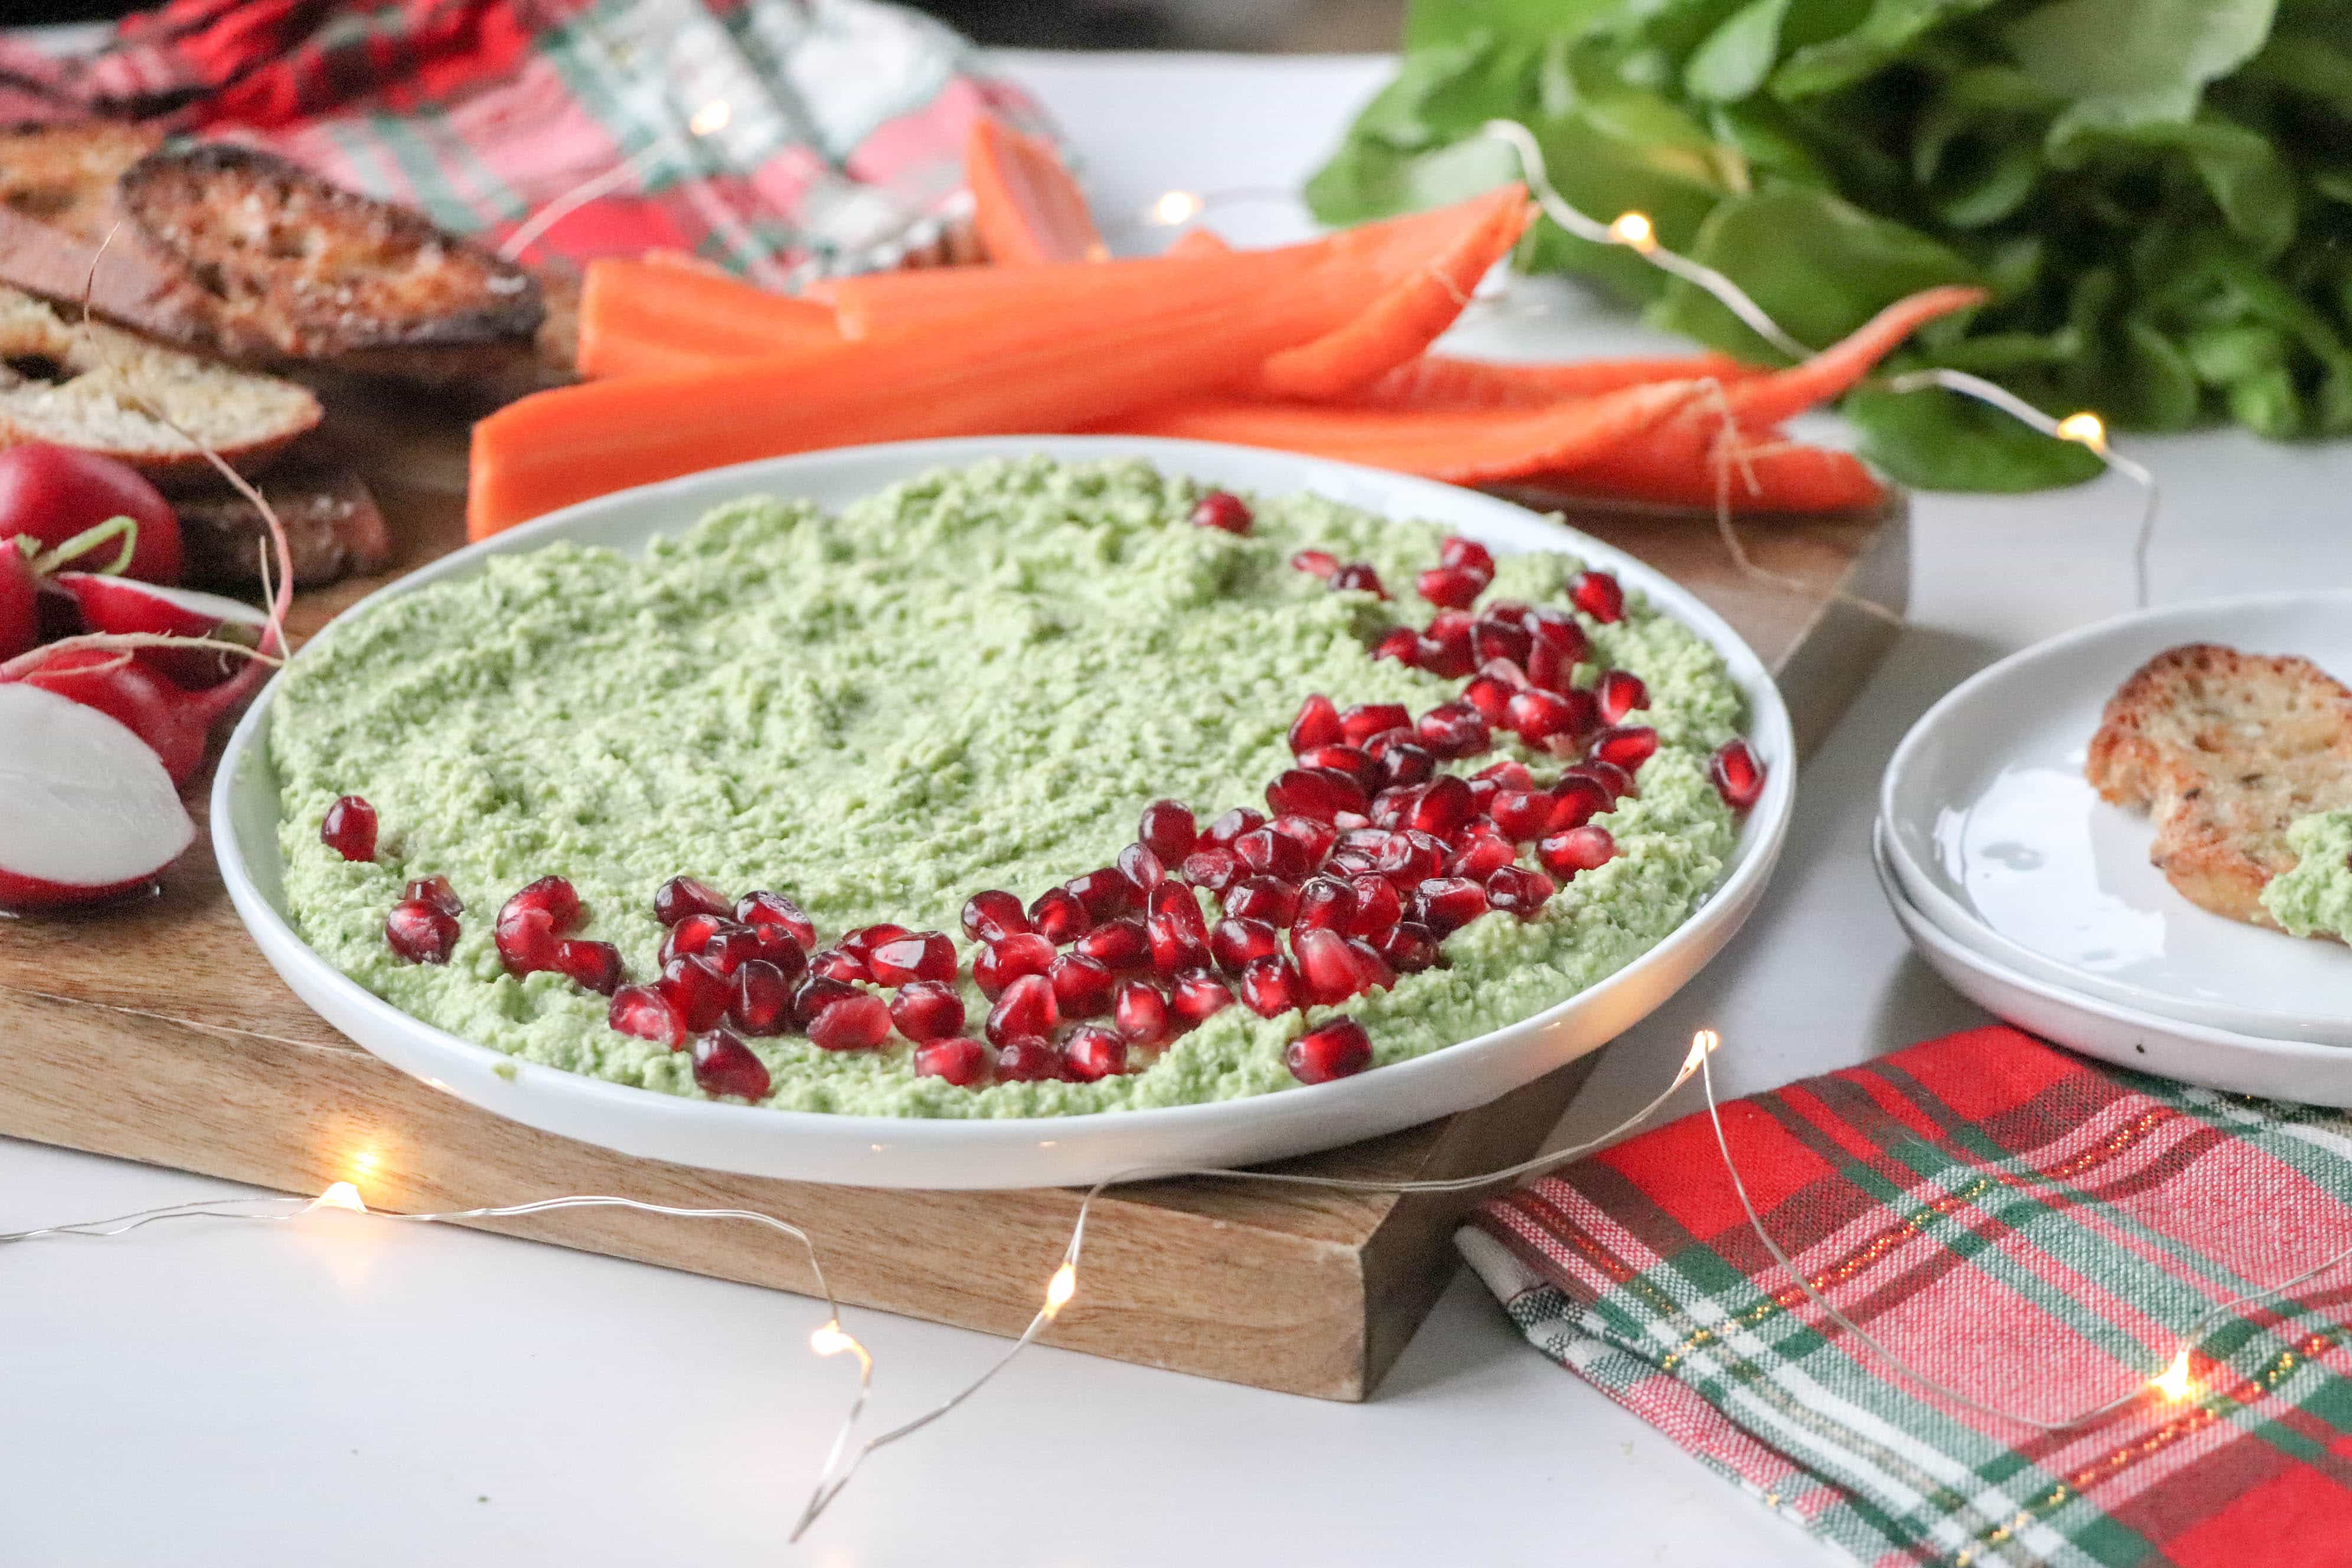 Creamy Edamame Dip | Festive Holiday Appy and Awesome Every Day Snack